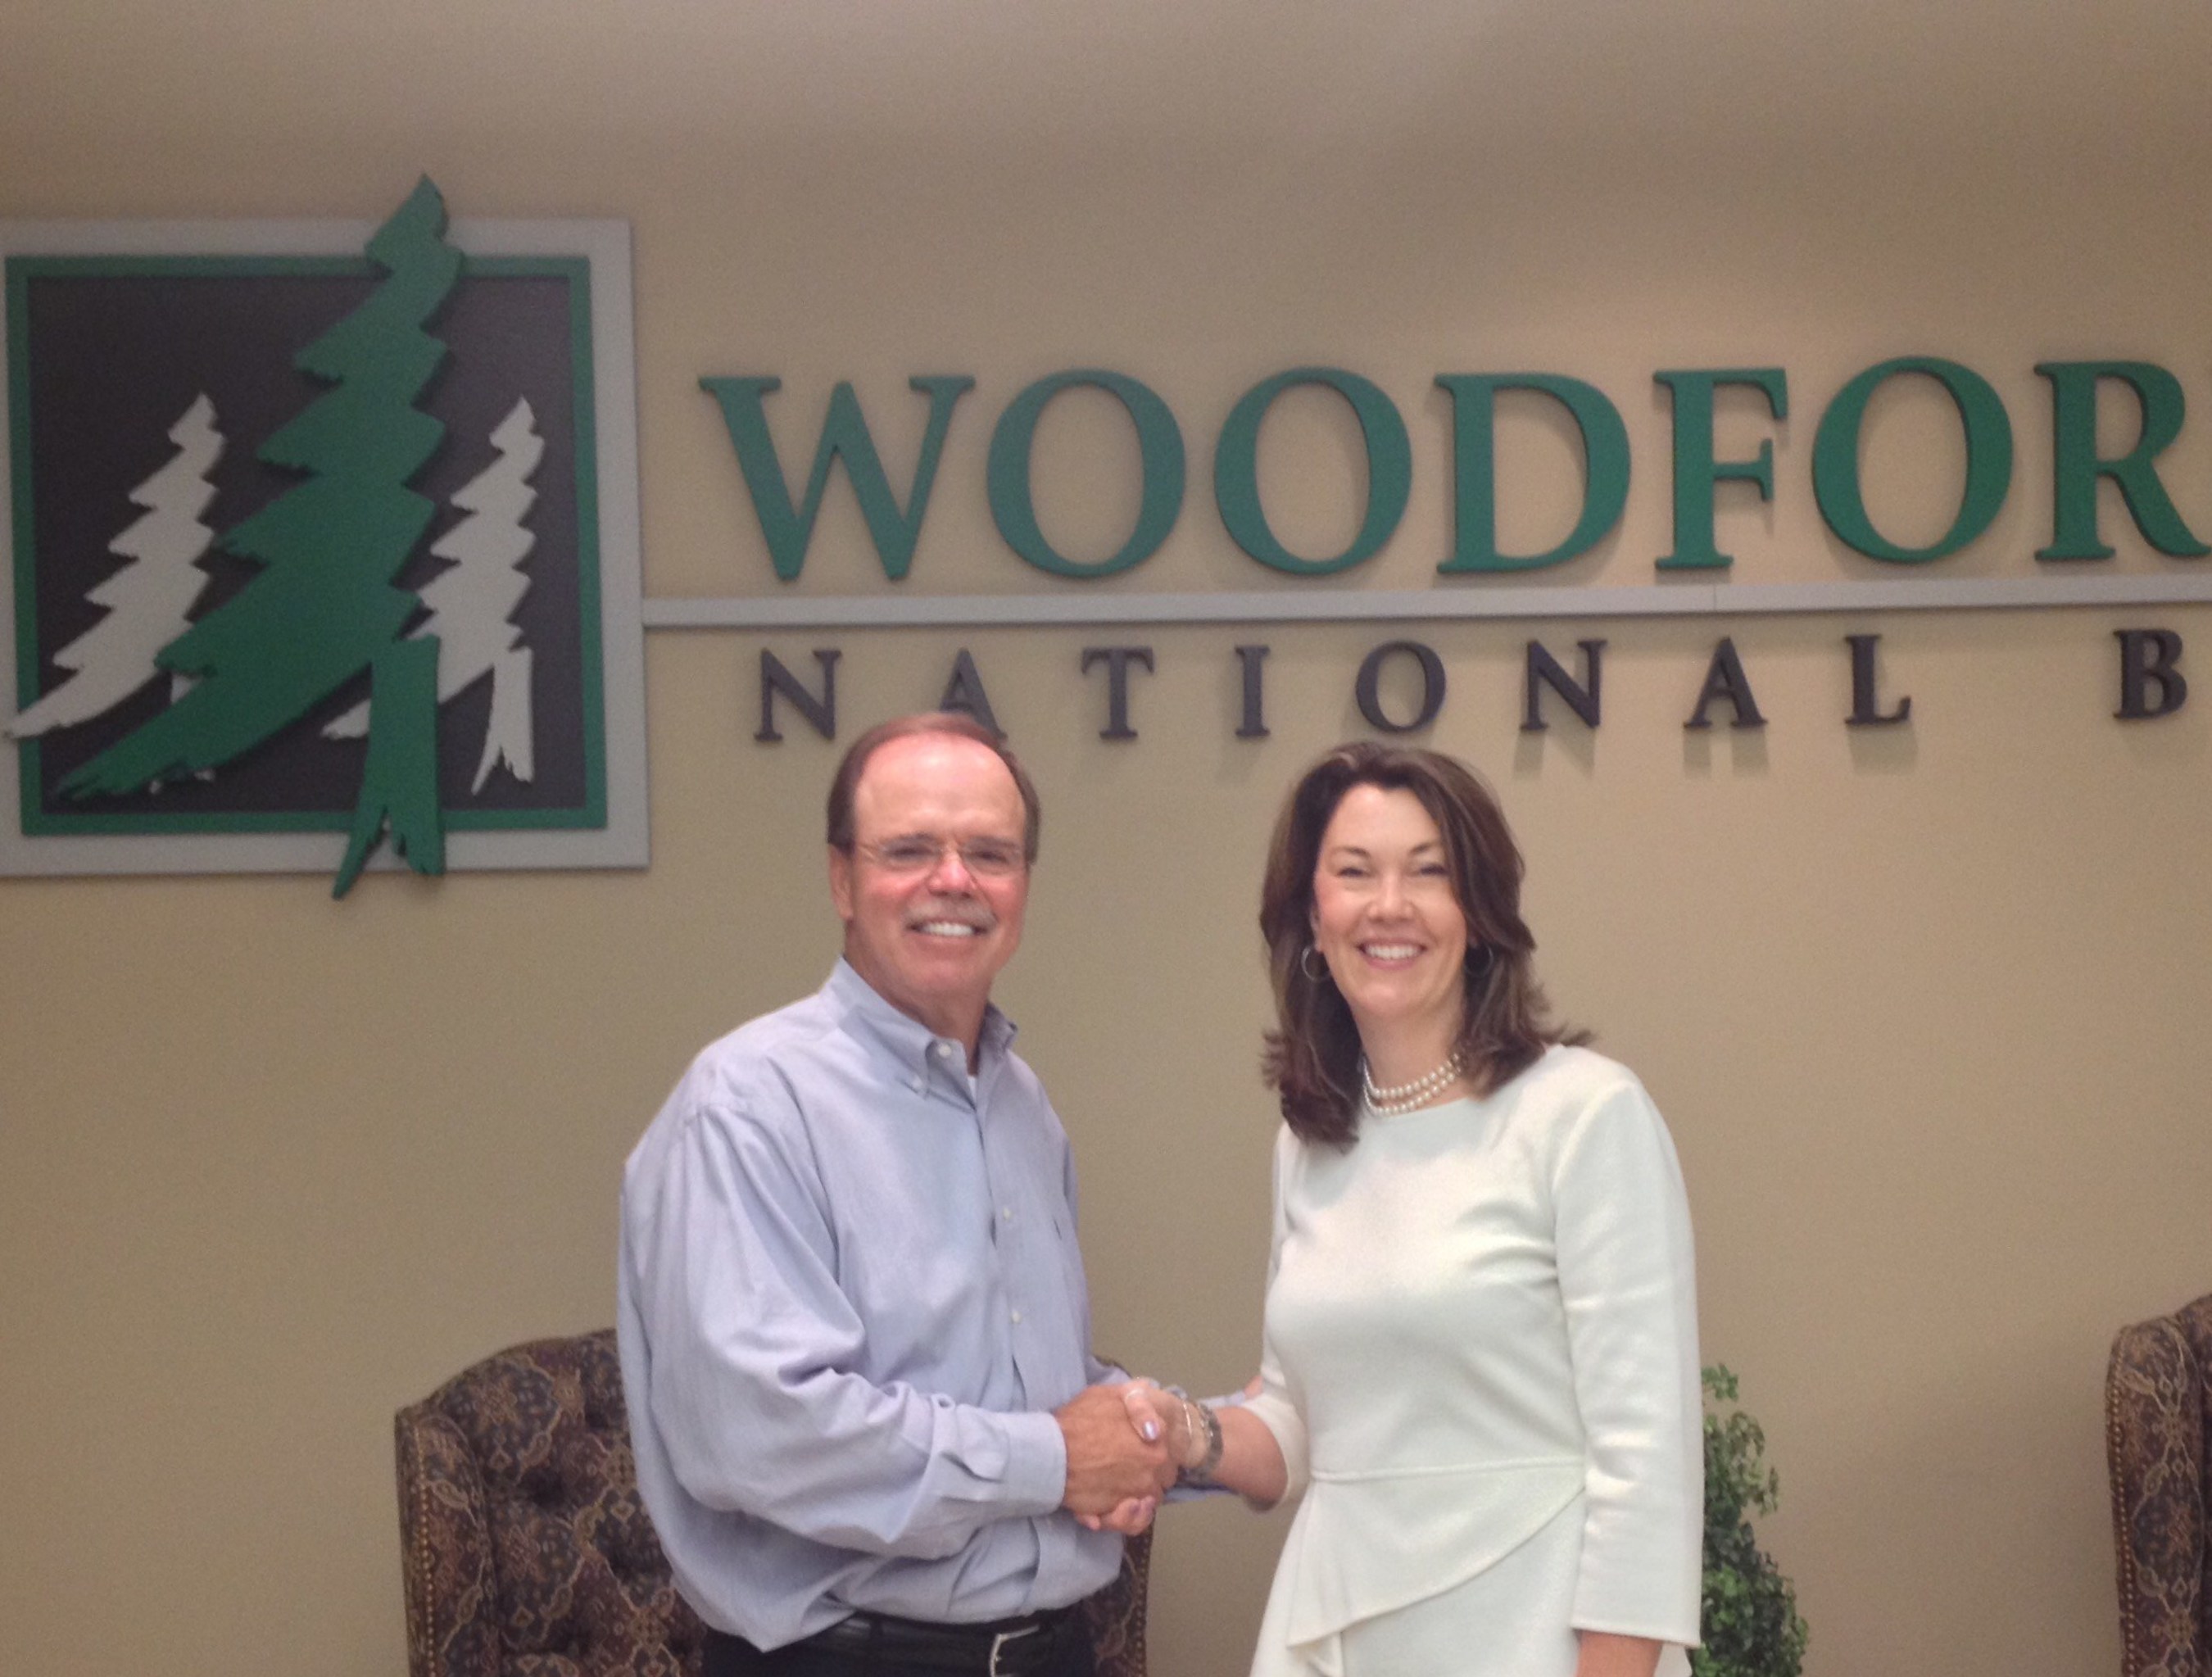 Robert E. Marling, Jr., Chairman and Chief Executive Officer of Woodforest Financial Group, Inc., announced the Board of Directors of Woodforest National Bank has named Cathleen (Cathy) Nash as the bank's President and Chief Executive Officer.